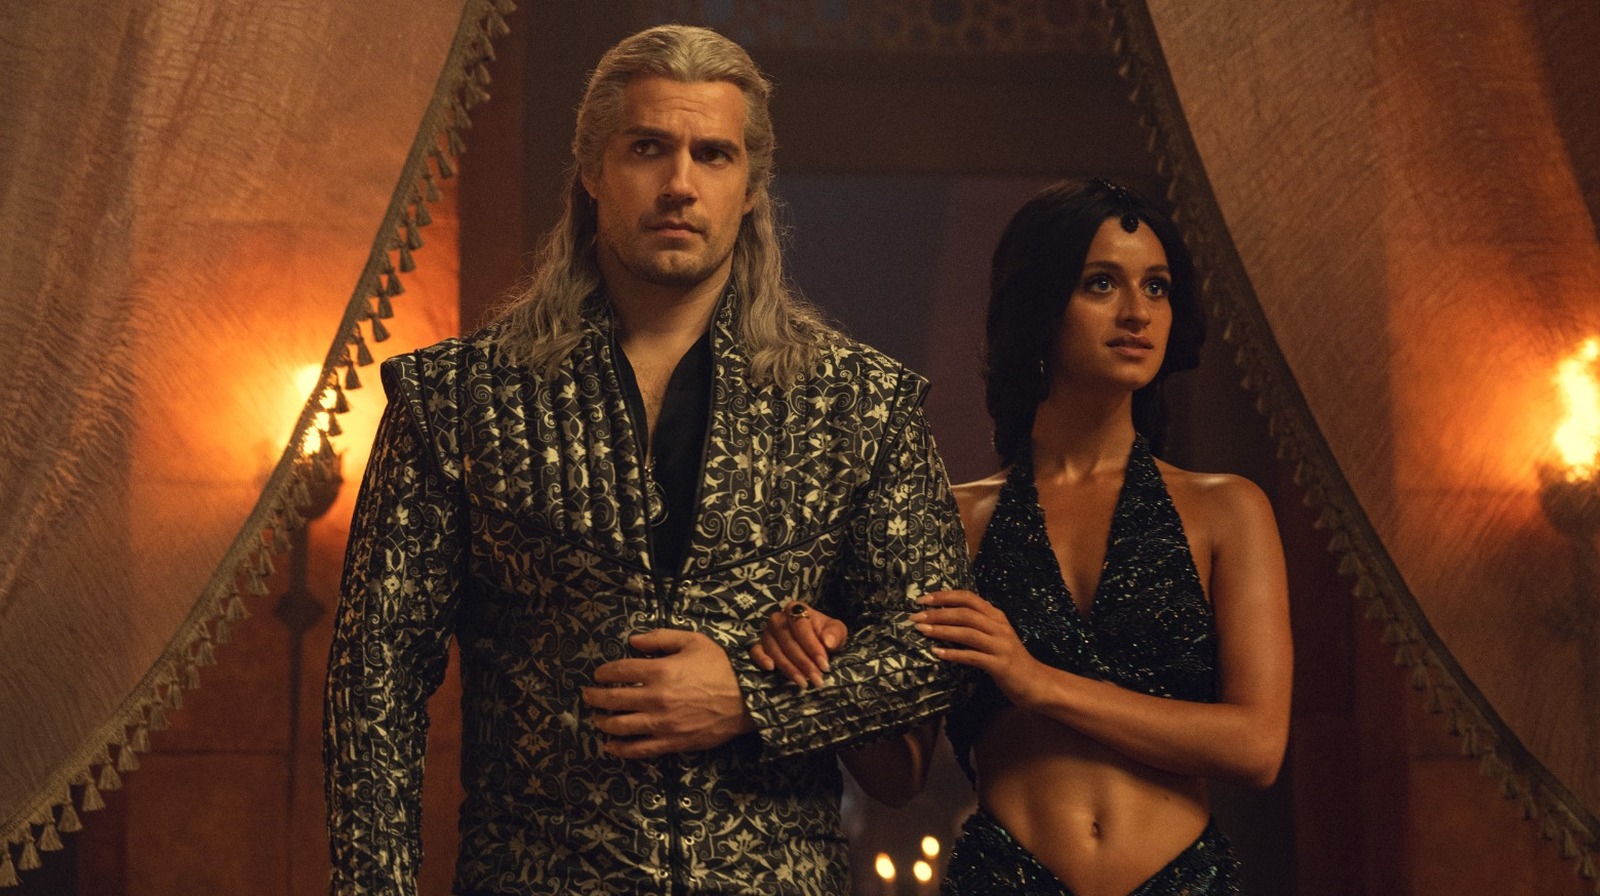 The Witcher Season 3’s greatest moment called for a different kind of TV